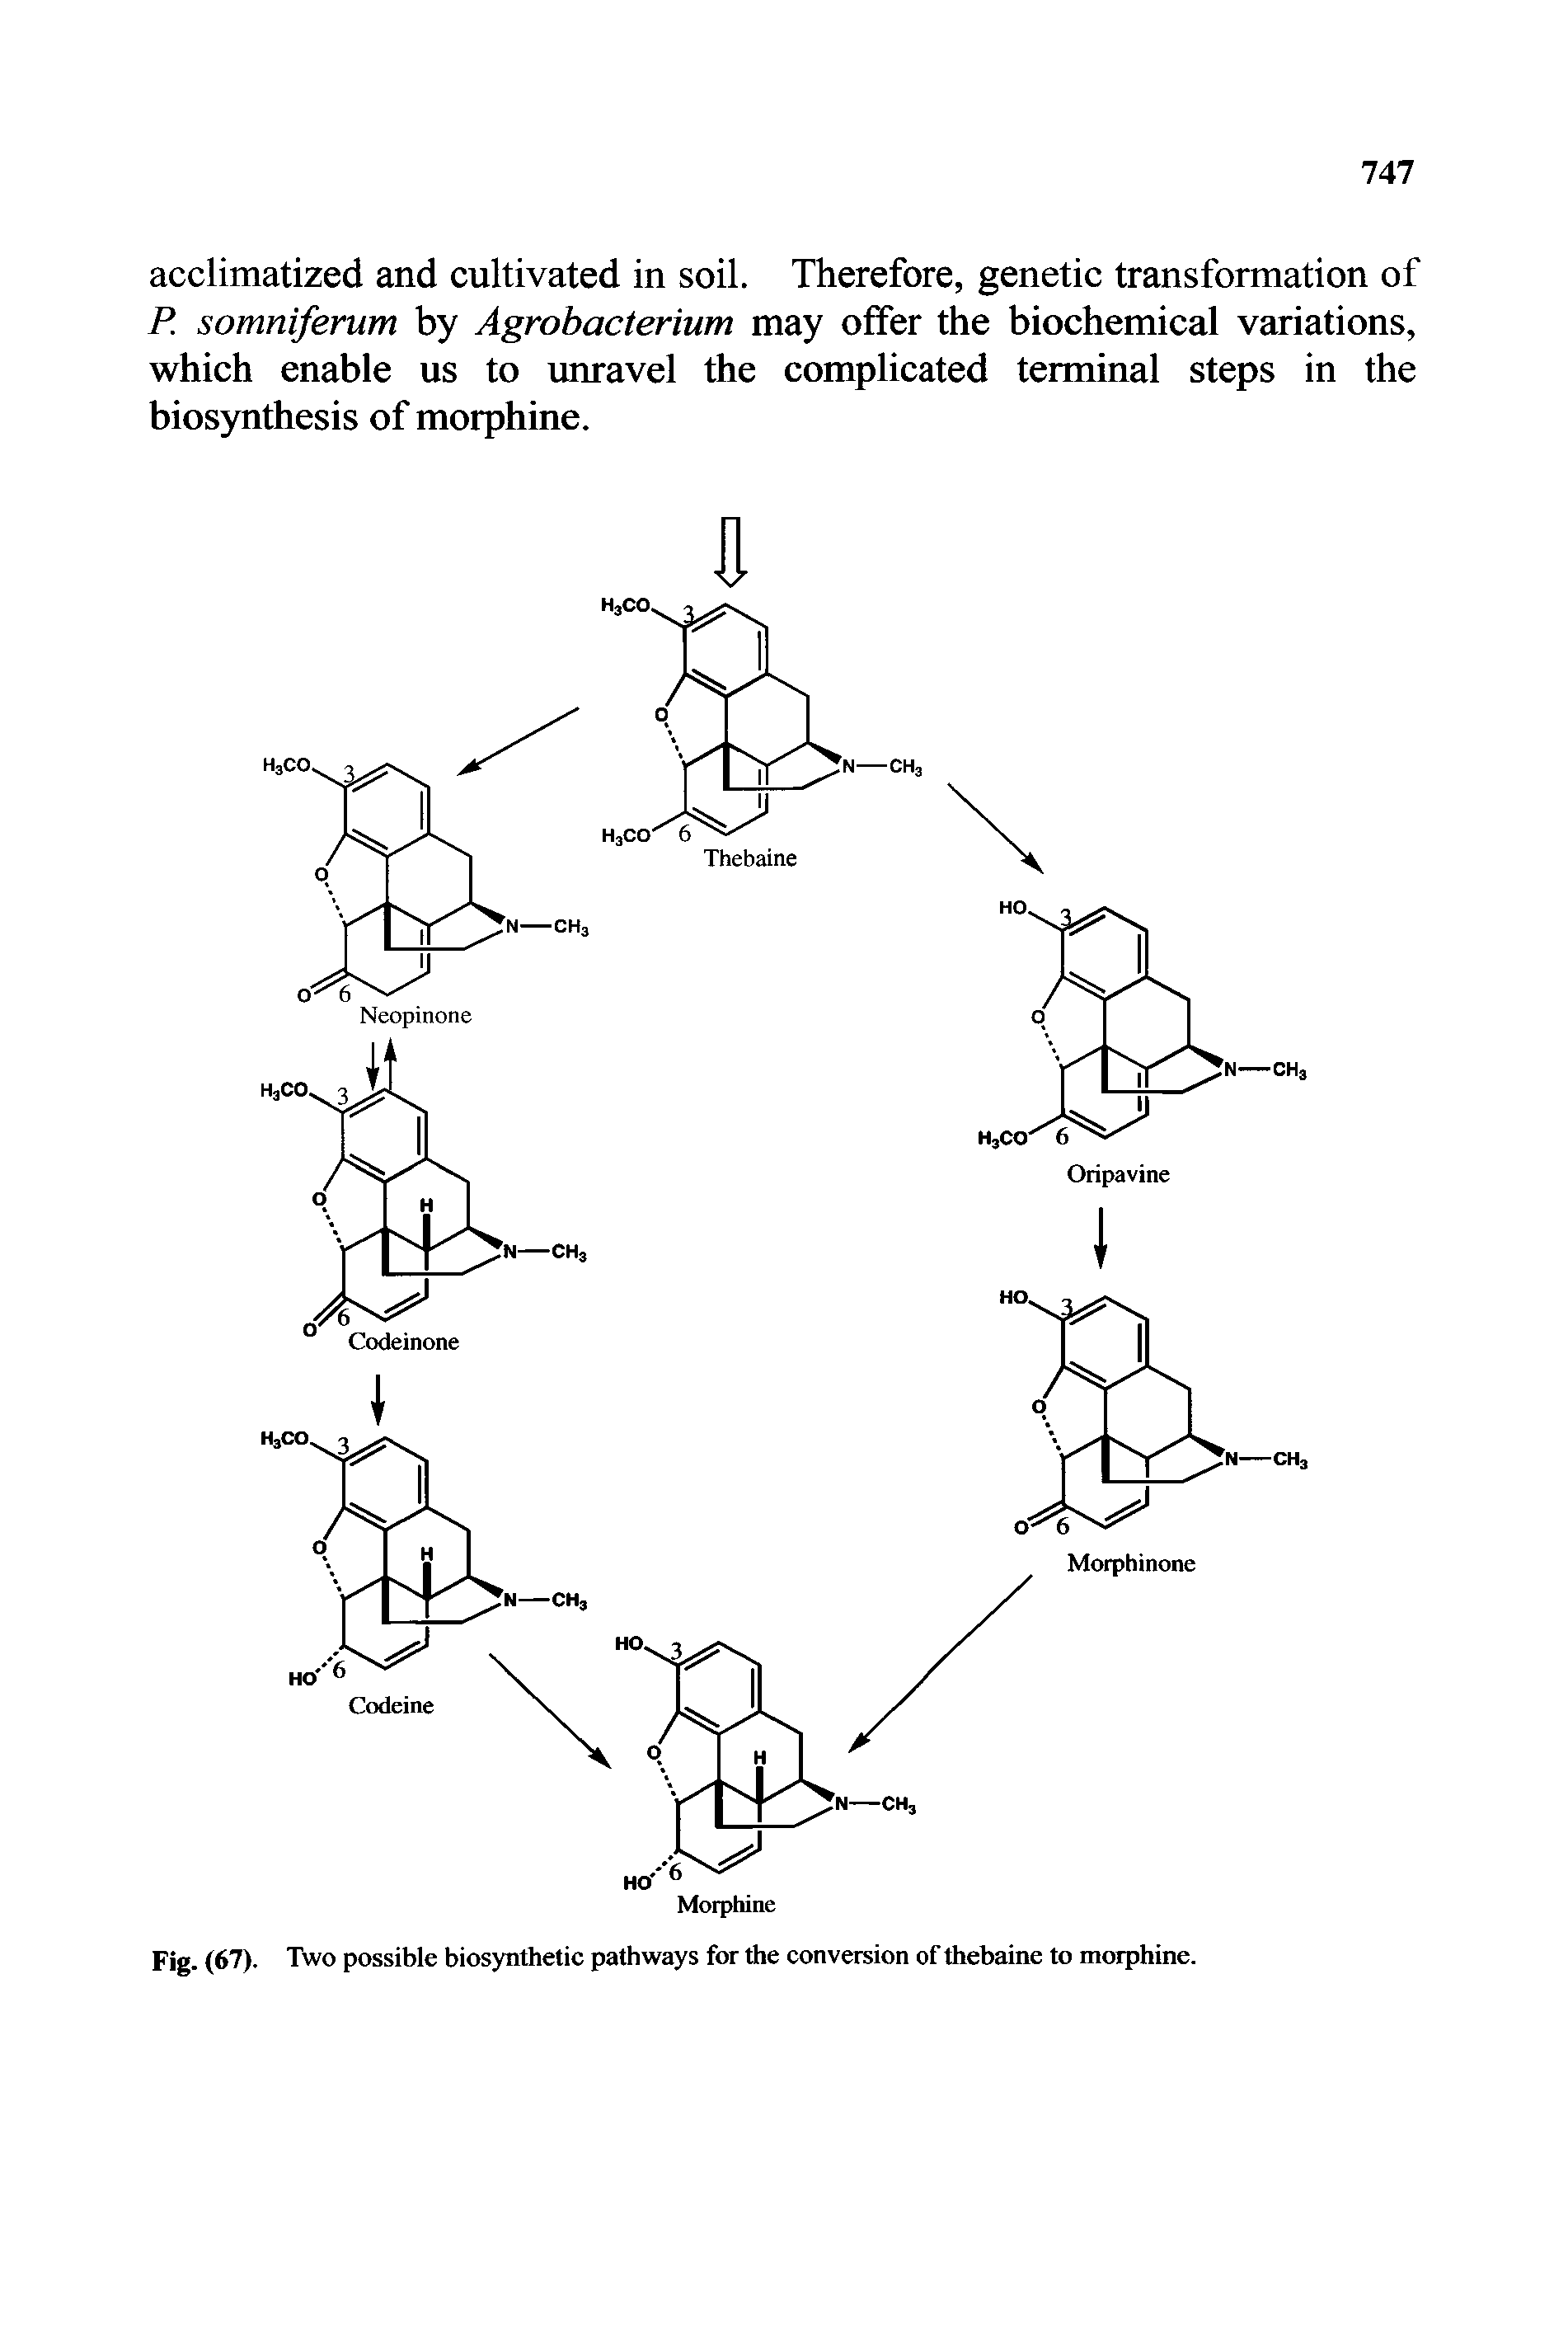 Fig. (67). Two possible biosynthetic pathways for the conversion of thebaine to morphine.